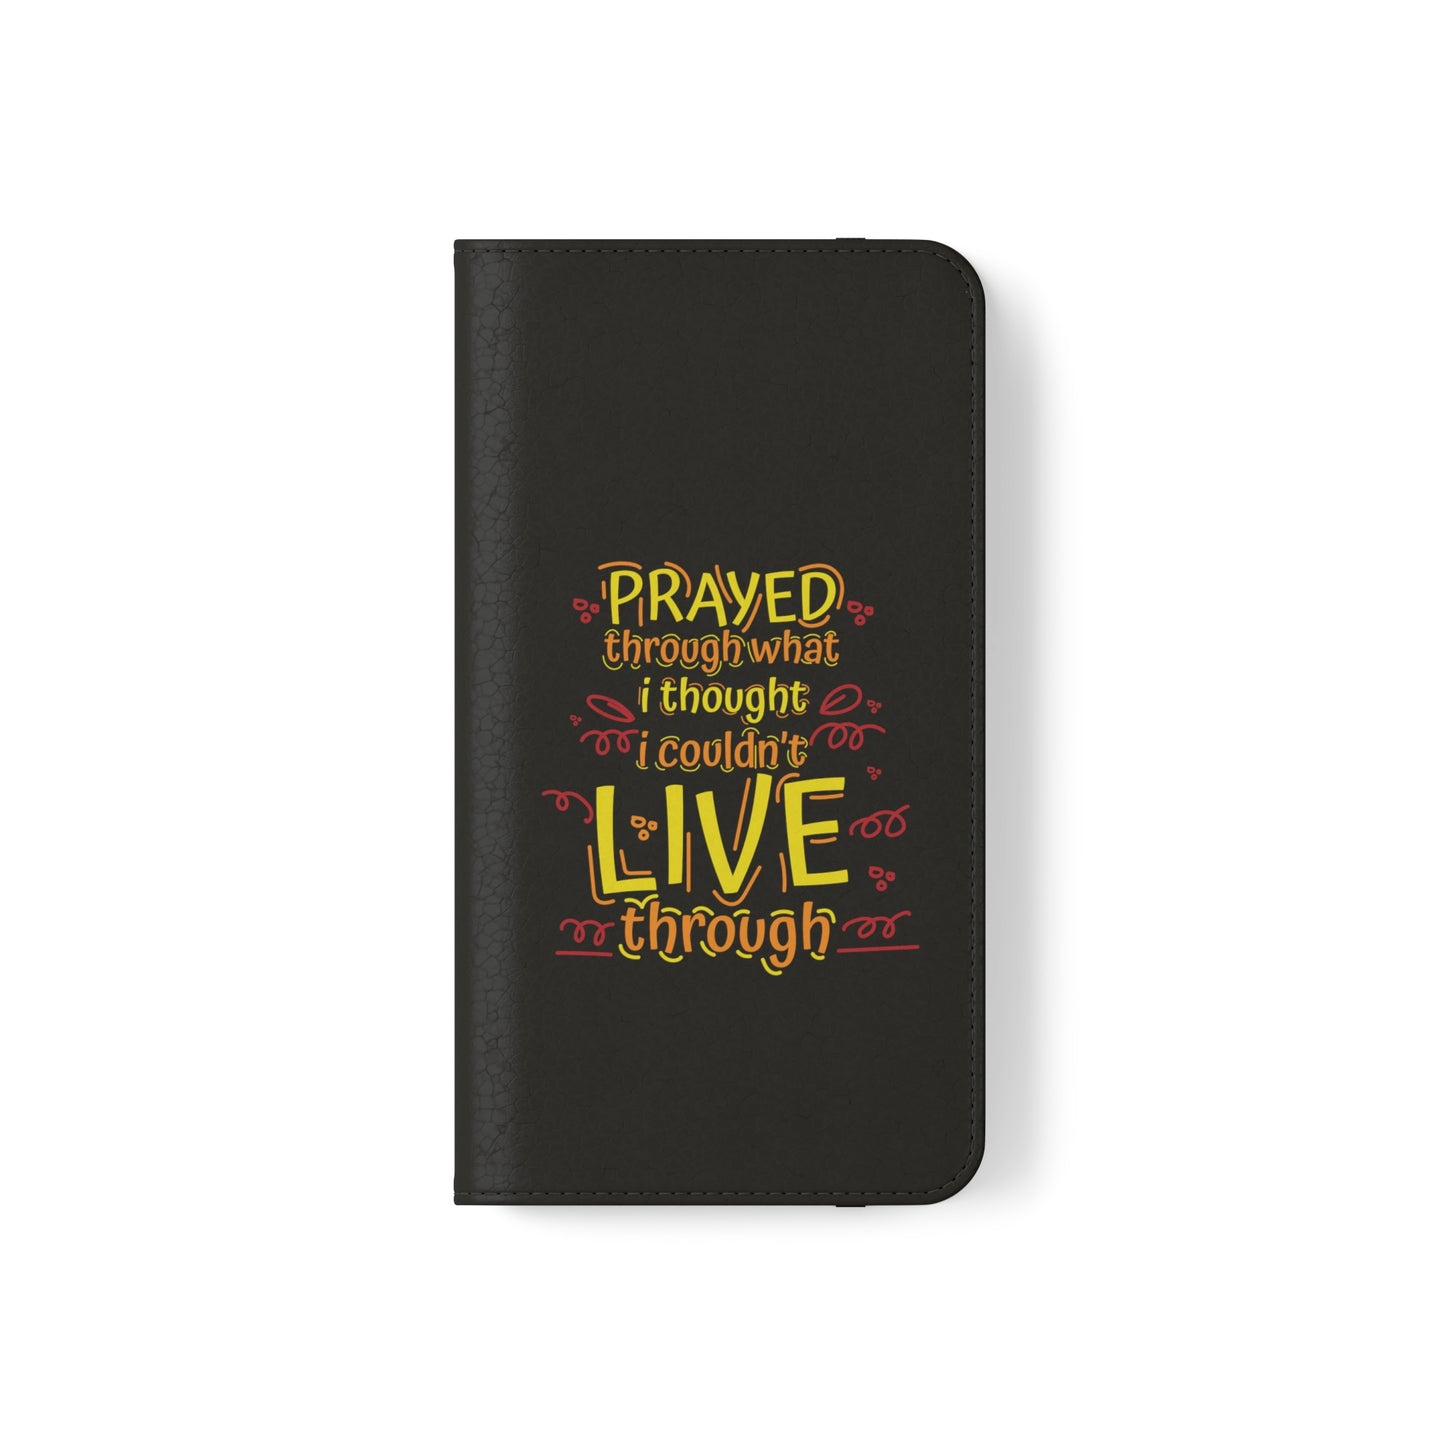 Prayed Through What I Thought I Couldn't Live Through Phone Flip Cases